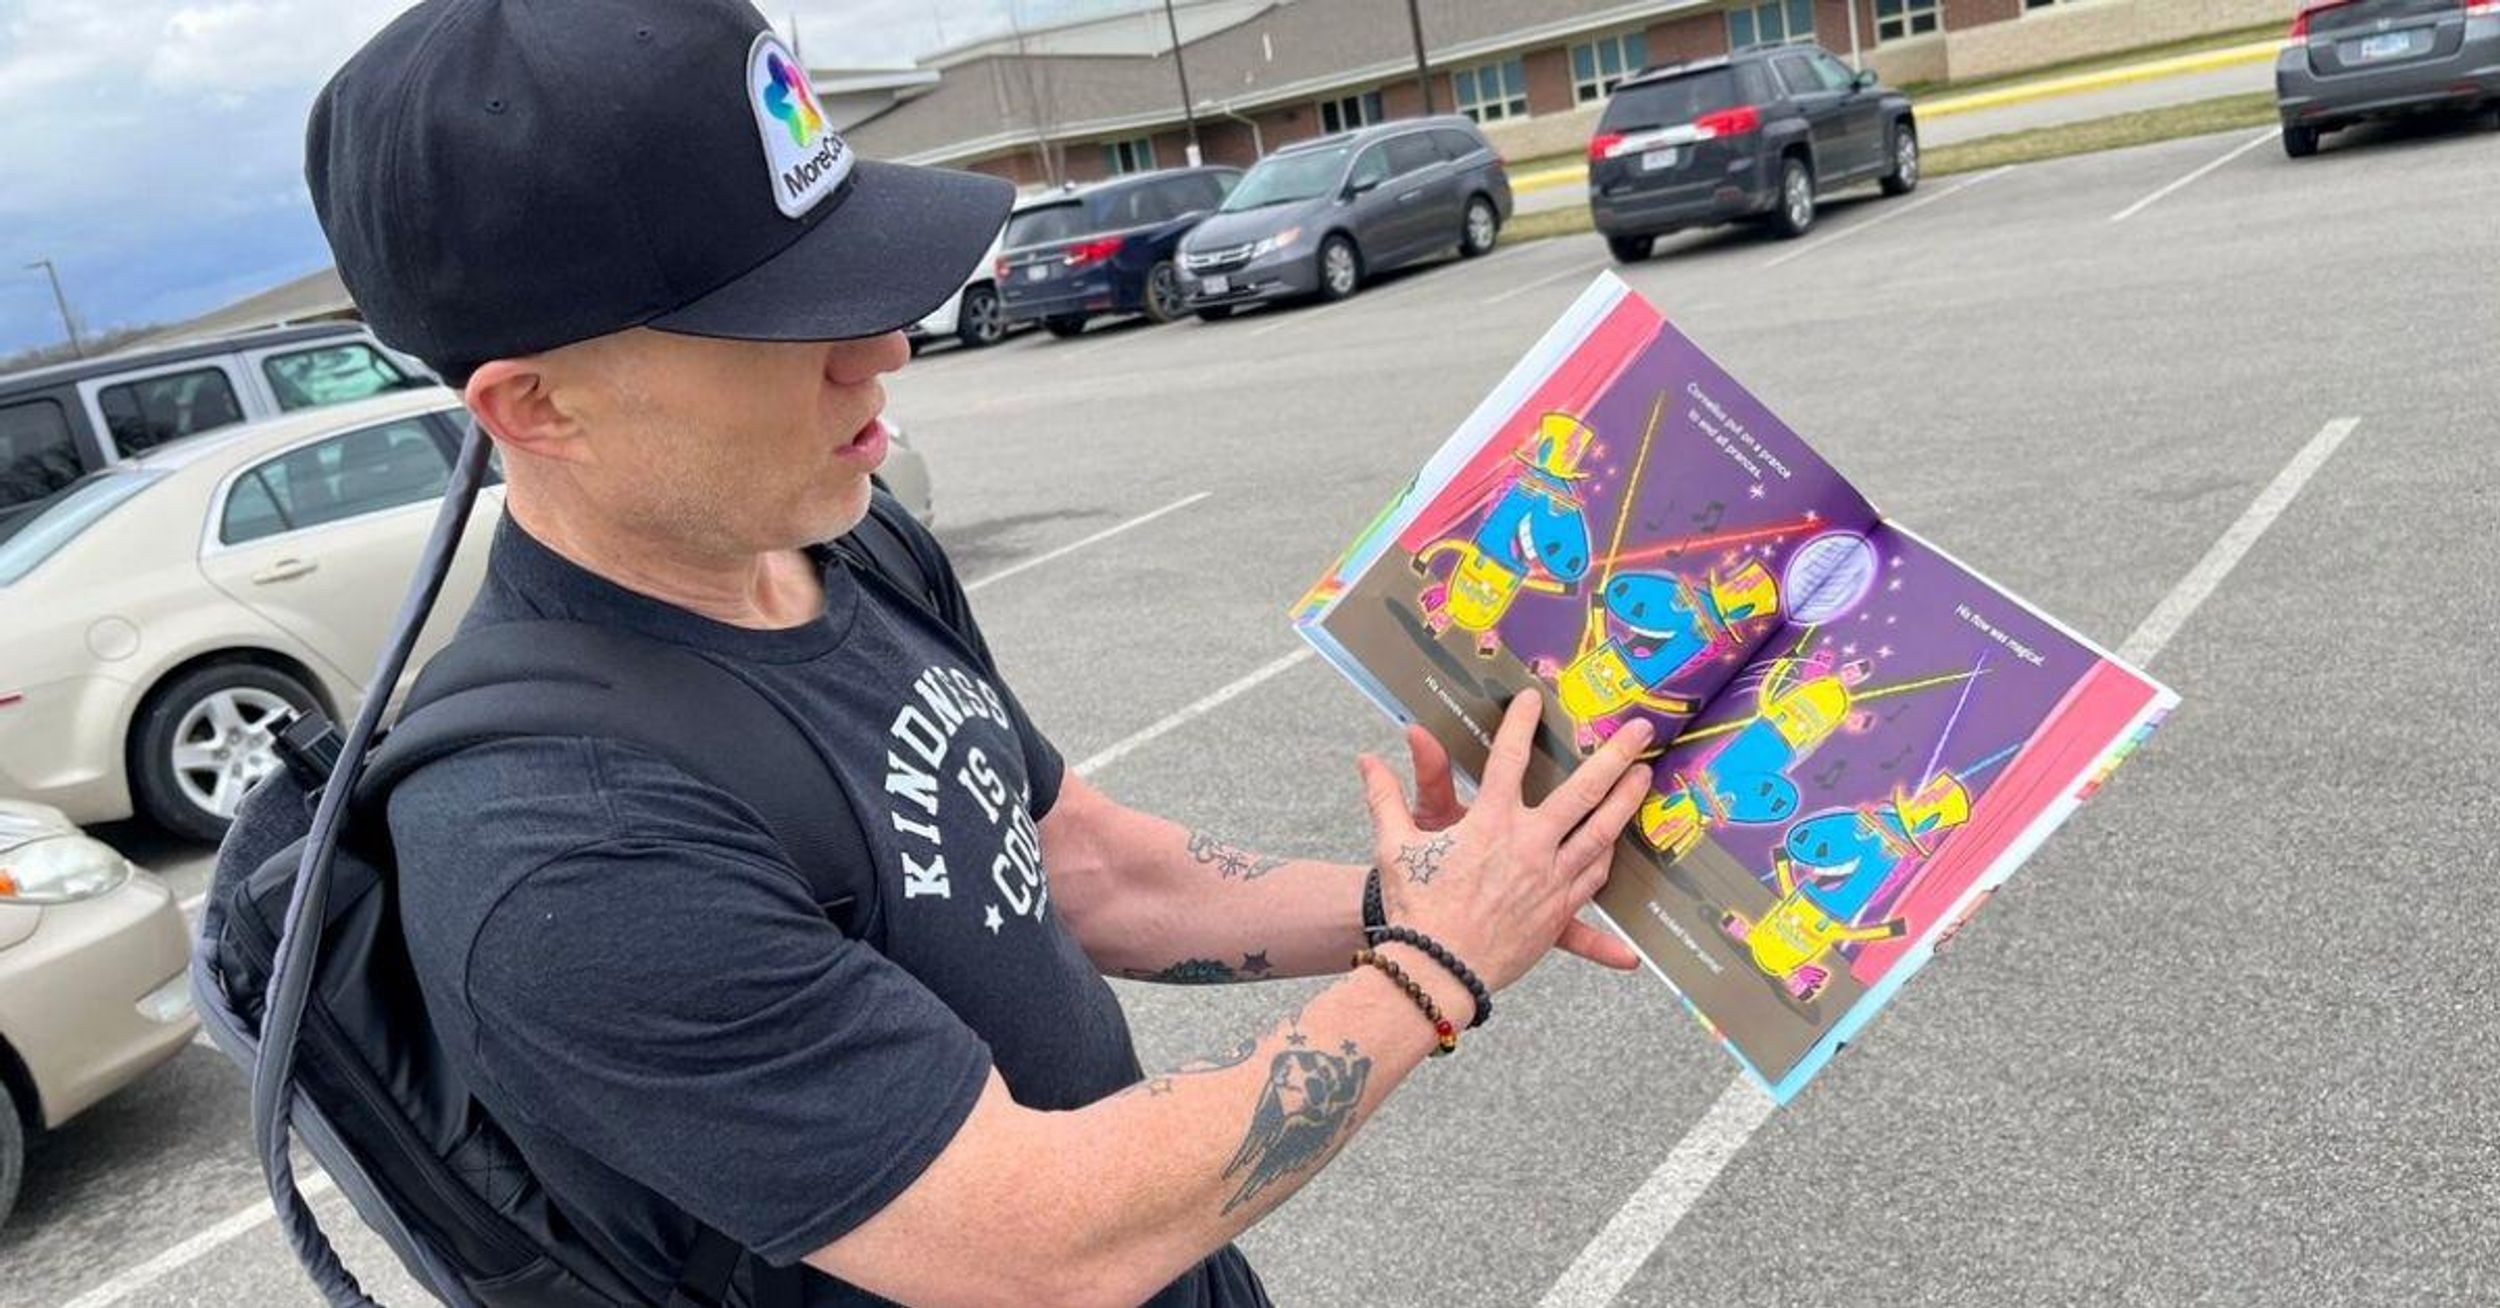 Author Baffled After Ohio School Bans Kids Book About Being A 'Unicorn' For 'Promoting A Gay Lifestyle'